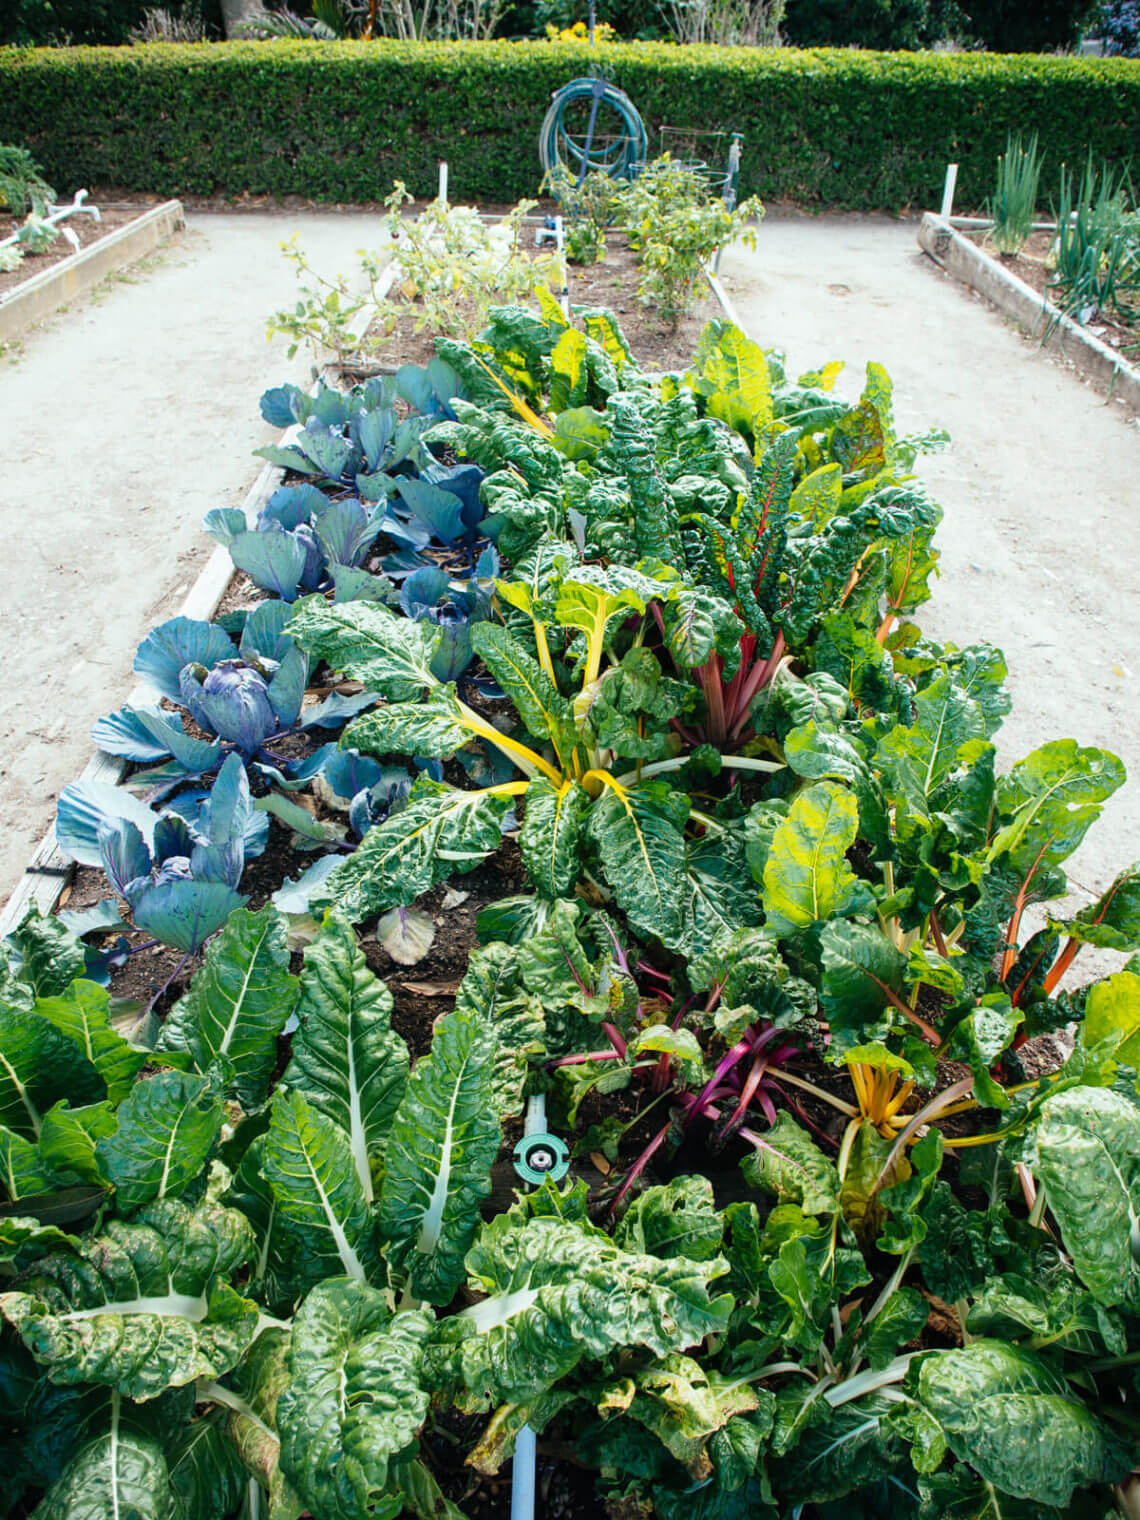 How much to plant in a vegetable garden to feed a family